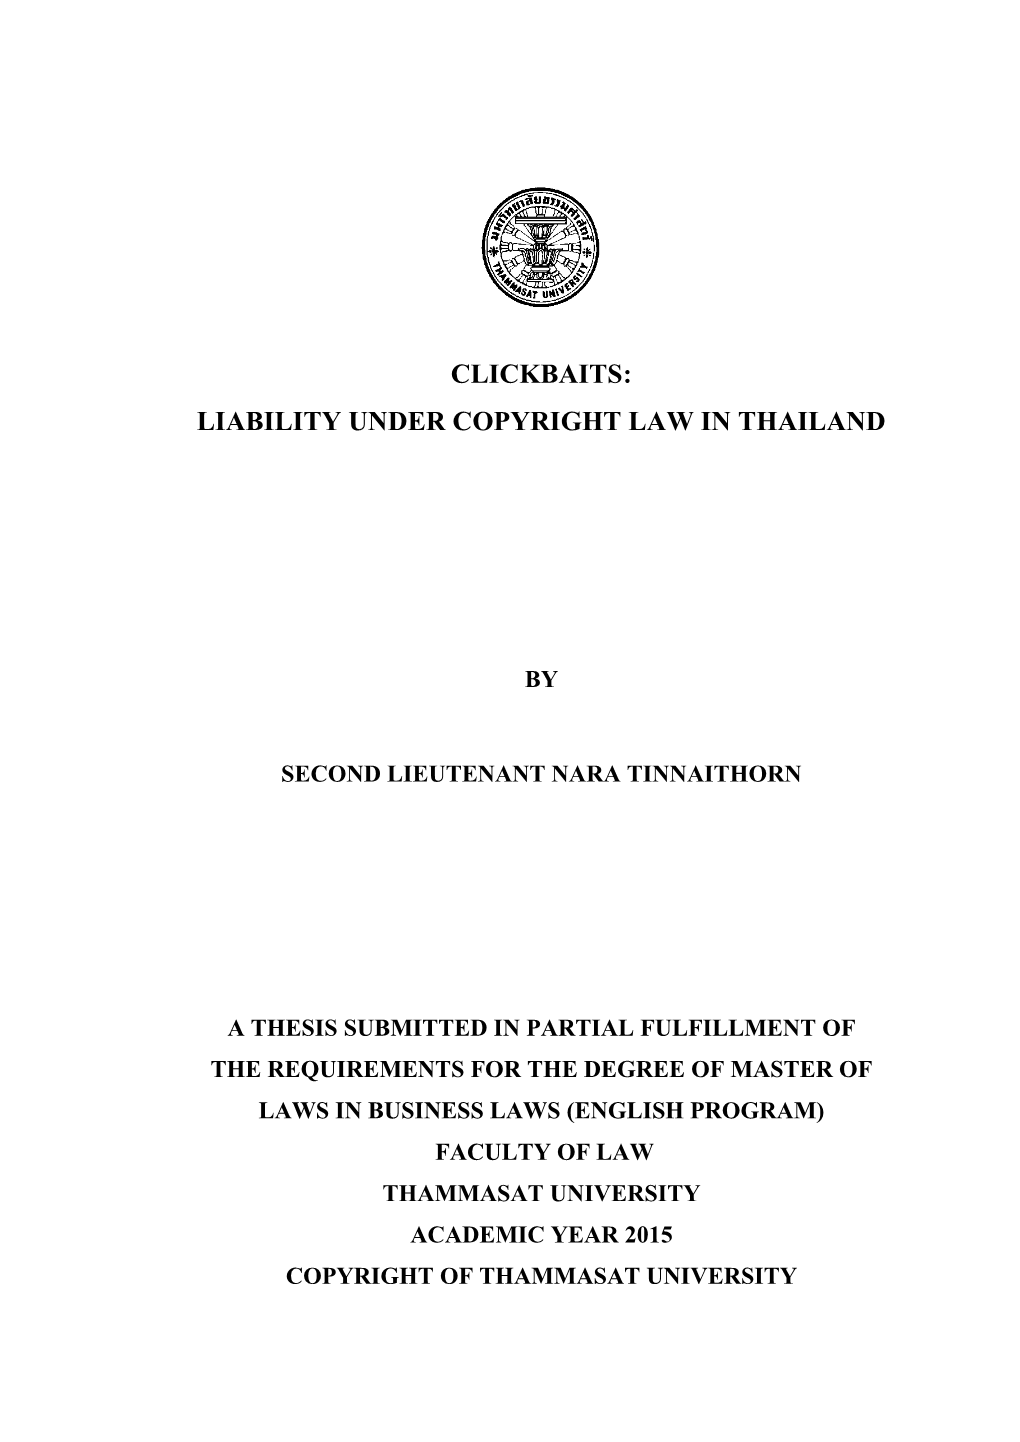 Liability Under Copyright Law in Thailand, CLICKBAITS